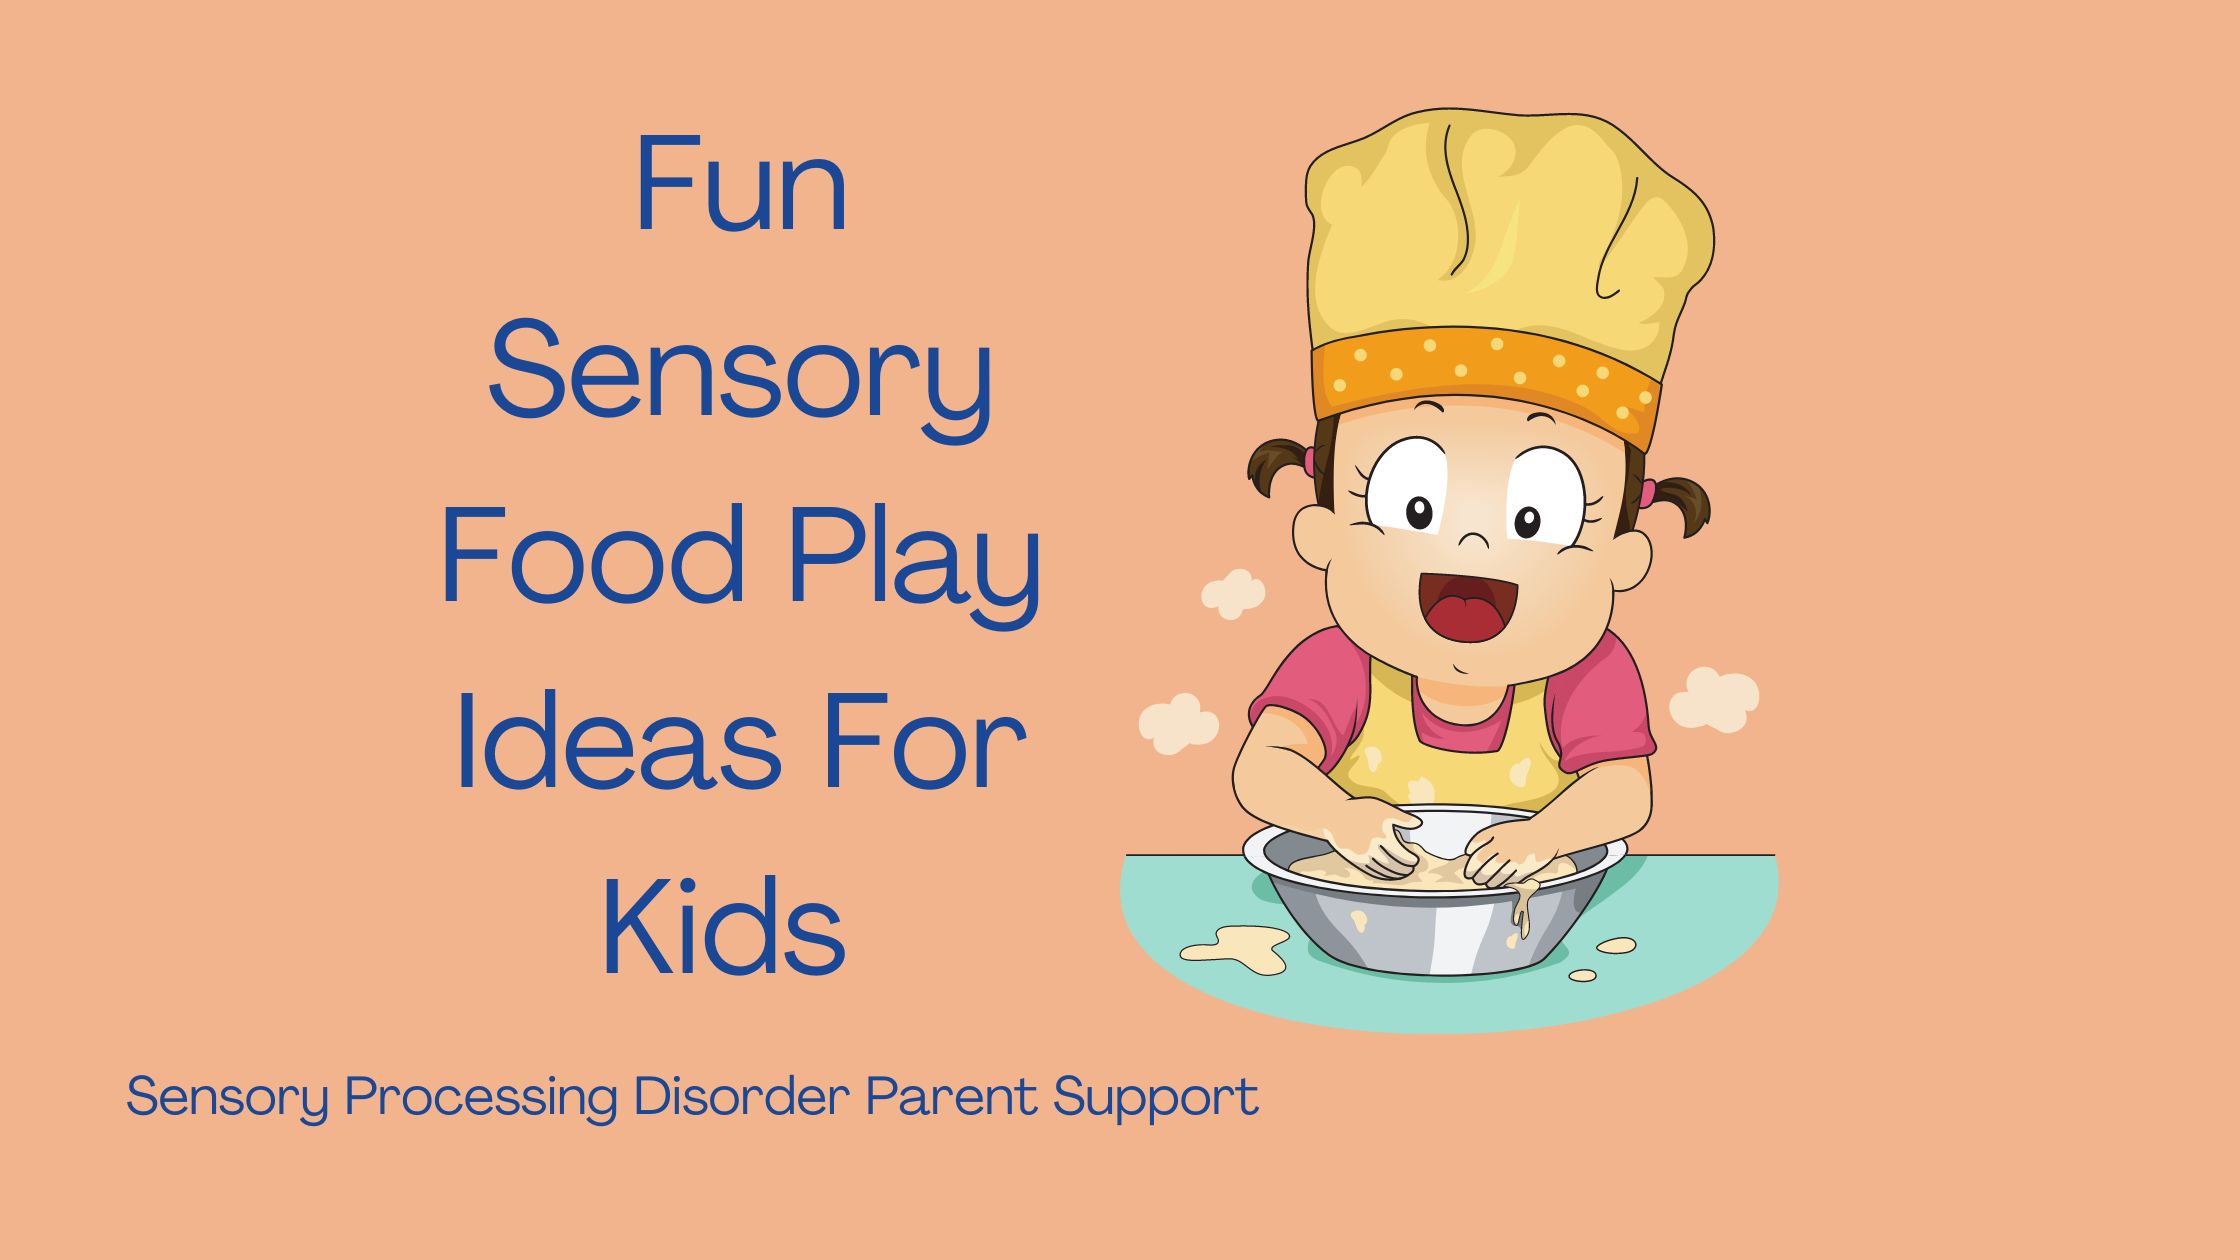 child with sensory processing disorder in the kitchen making fun food sensory ideas Fun Sensory Food Play Ideas For Kids